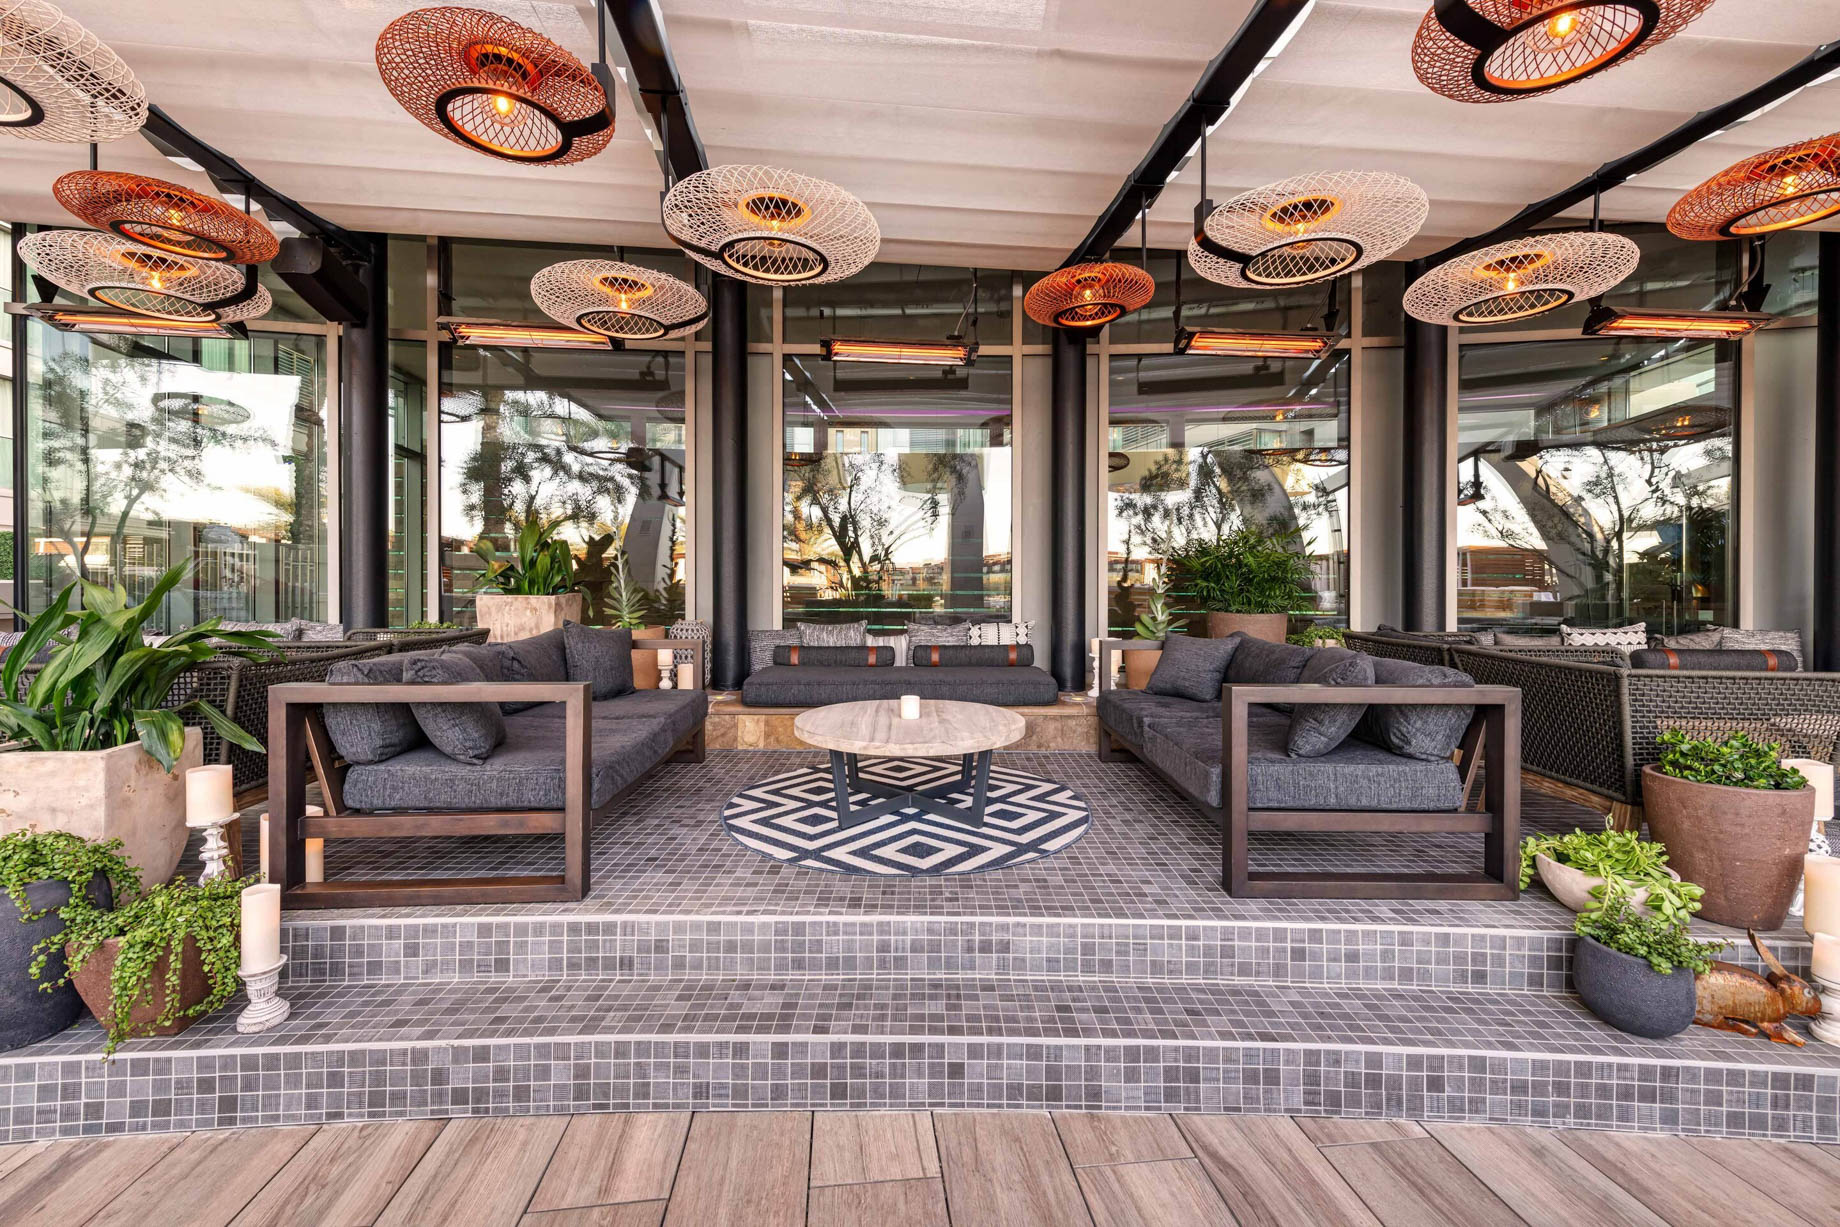 W Scottsdale Hotel - Scottsdale, AZ, USA - Cottontail Cafe and Lounge Exterior Seating